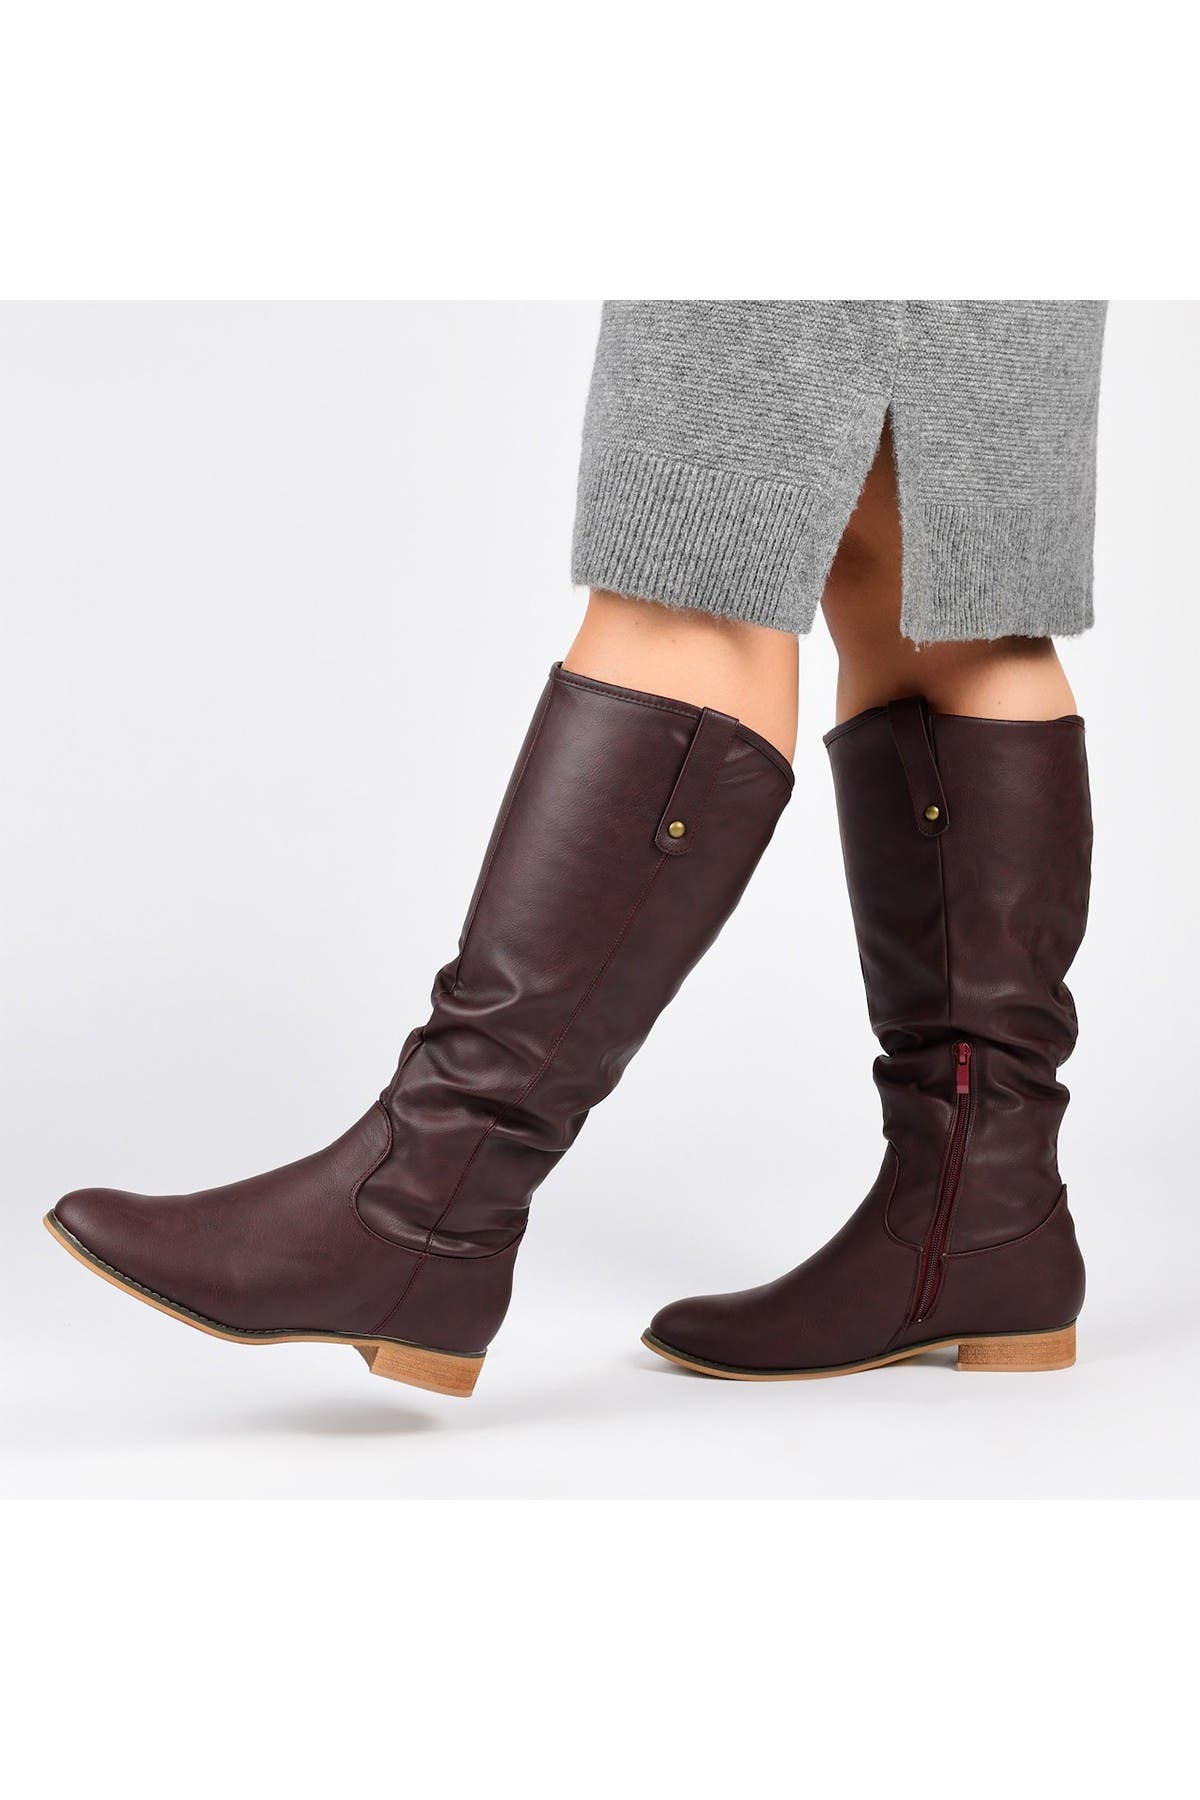 extra wide width calf boots